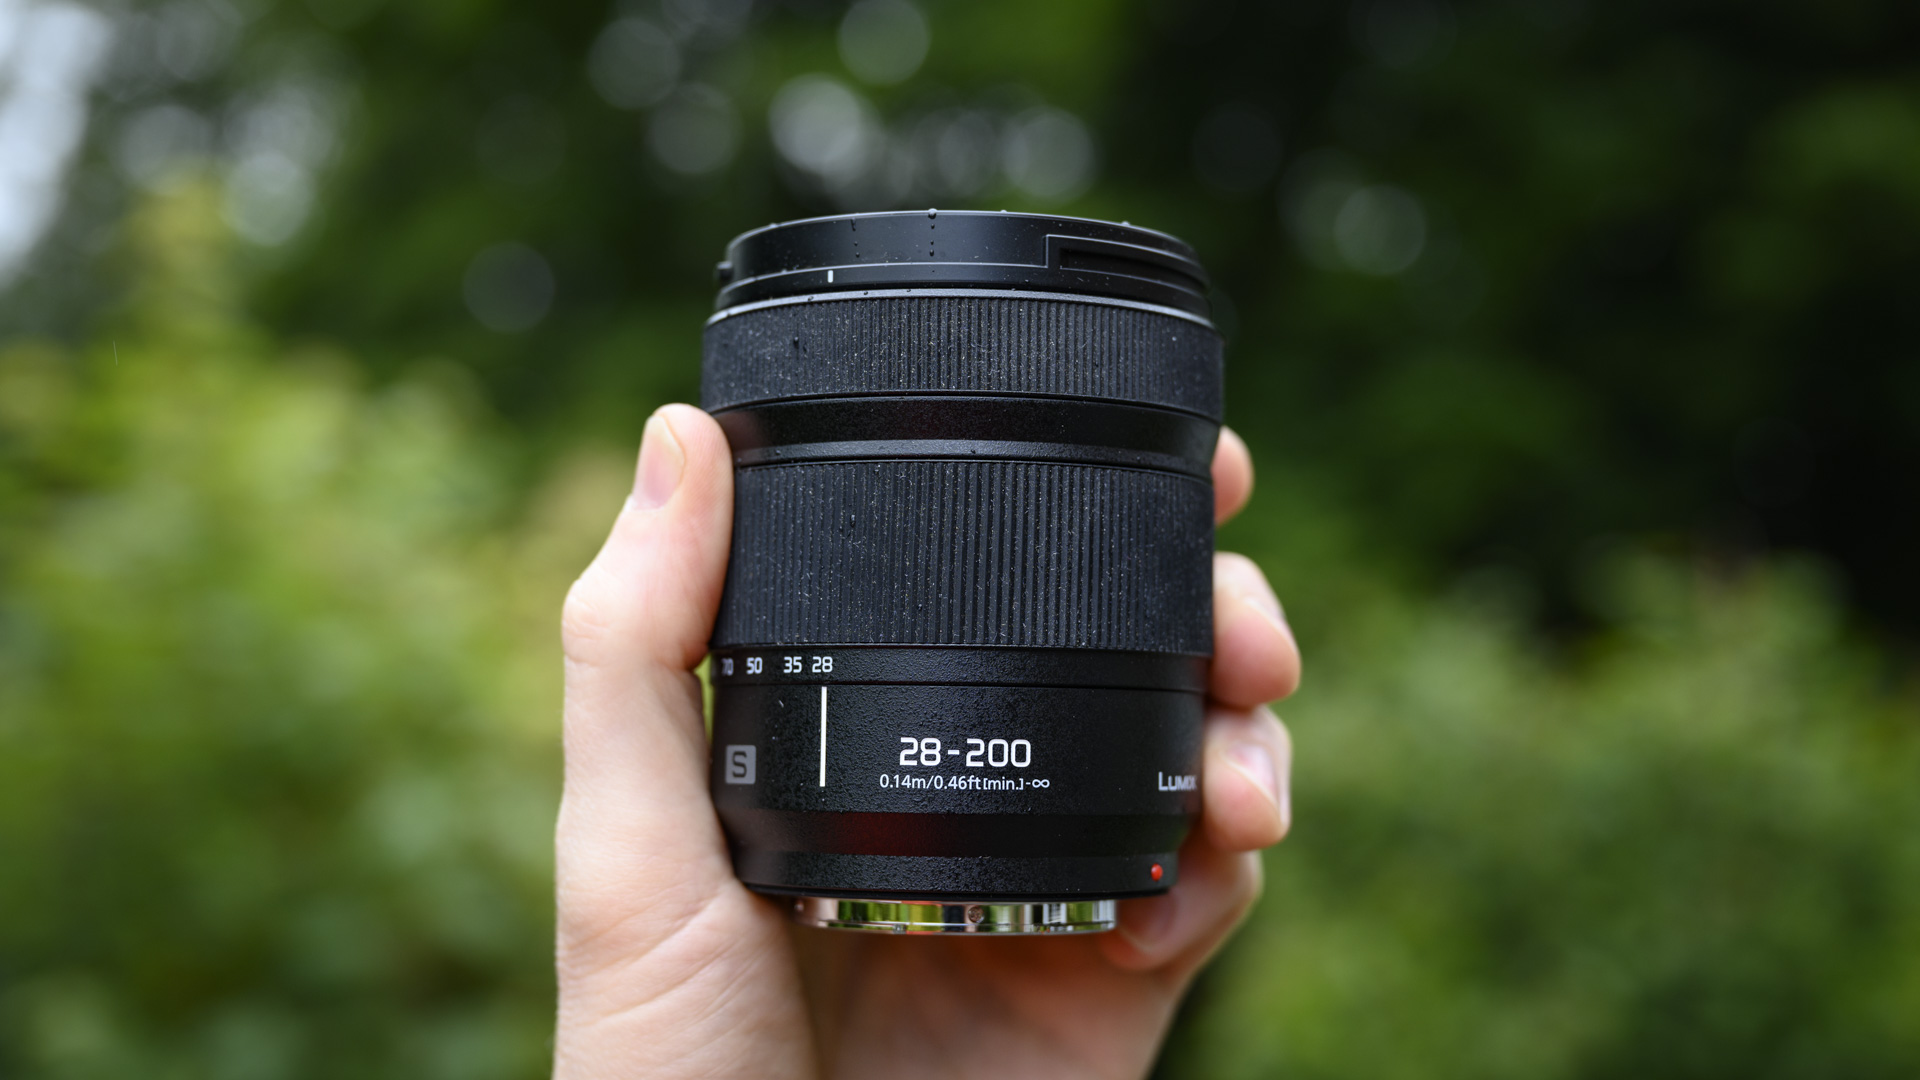 Panasonic Lumix S 28-200mm travel lens in the hand with leafy background and light rain